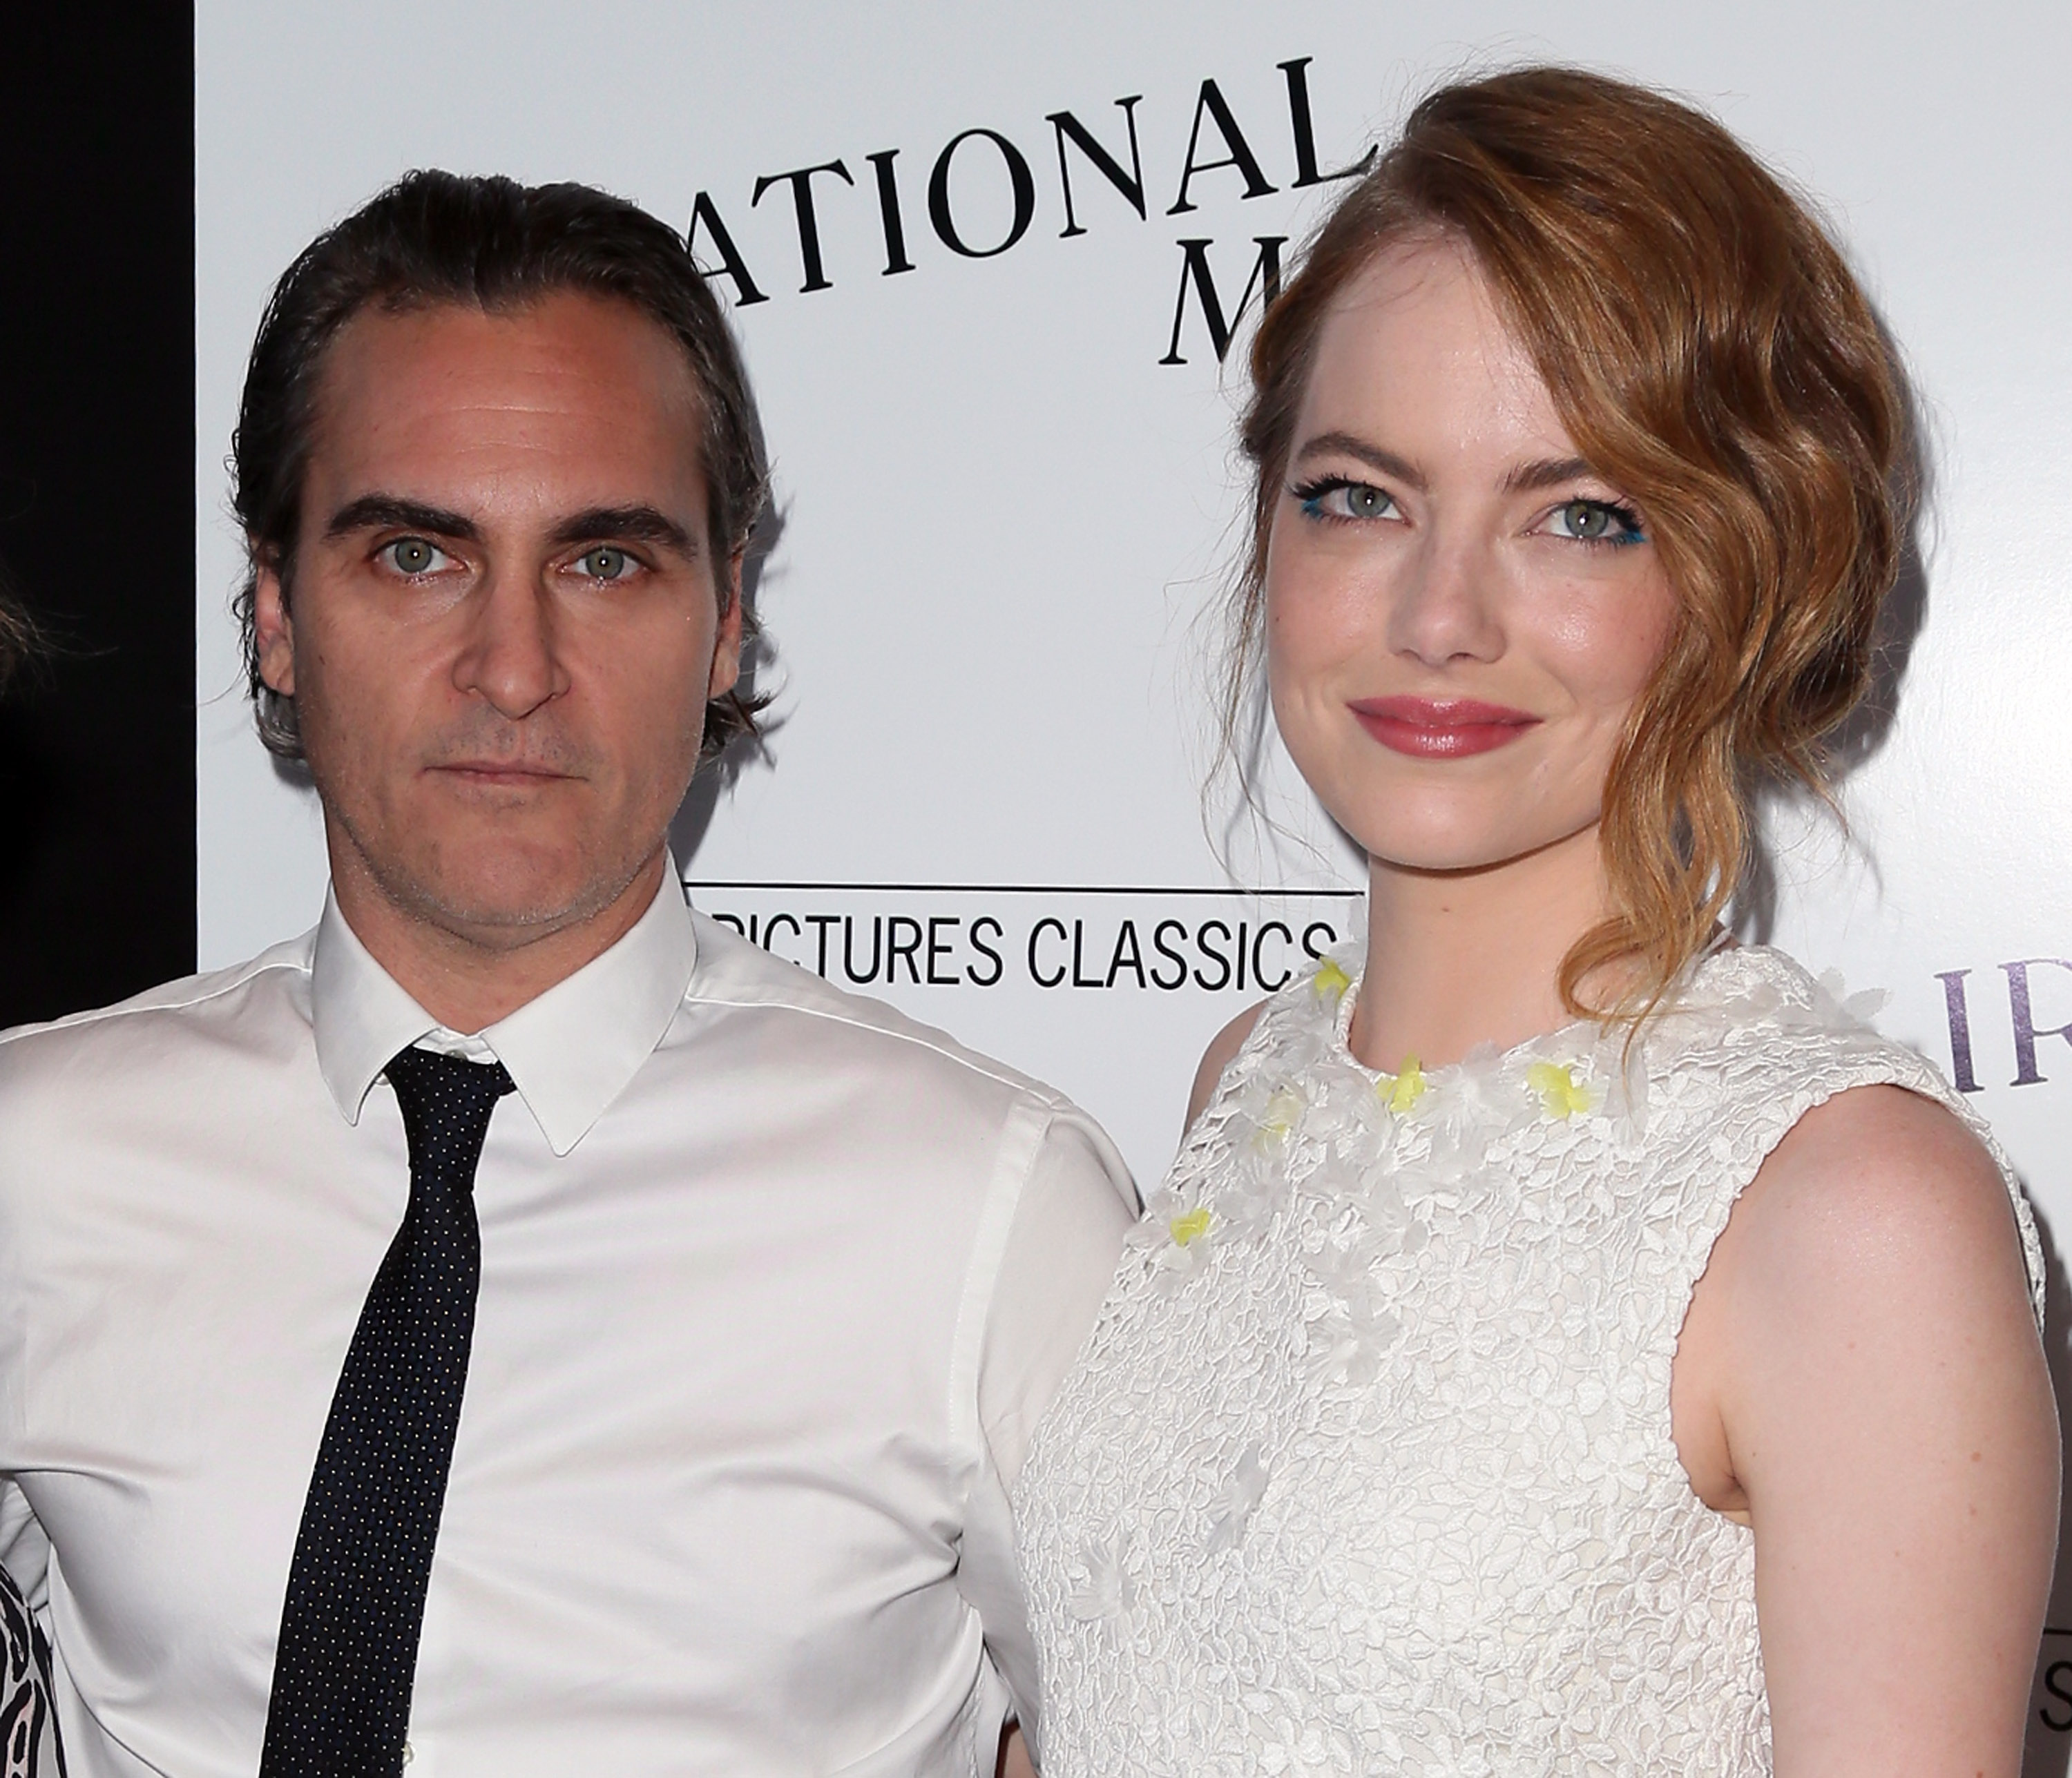 Joaquin Phoenix and Emma Stone attend the premiere of "Irrational Man" in Los Angeles on July 9, 2015. (David Livingston--Getty Images)